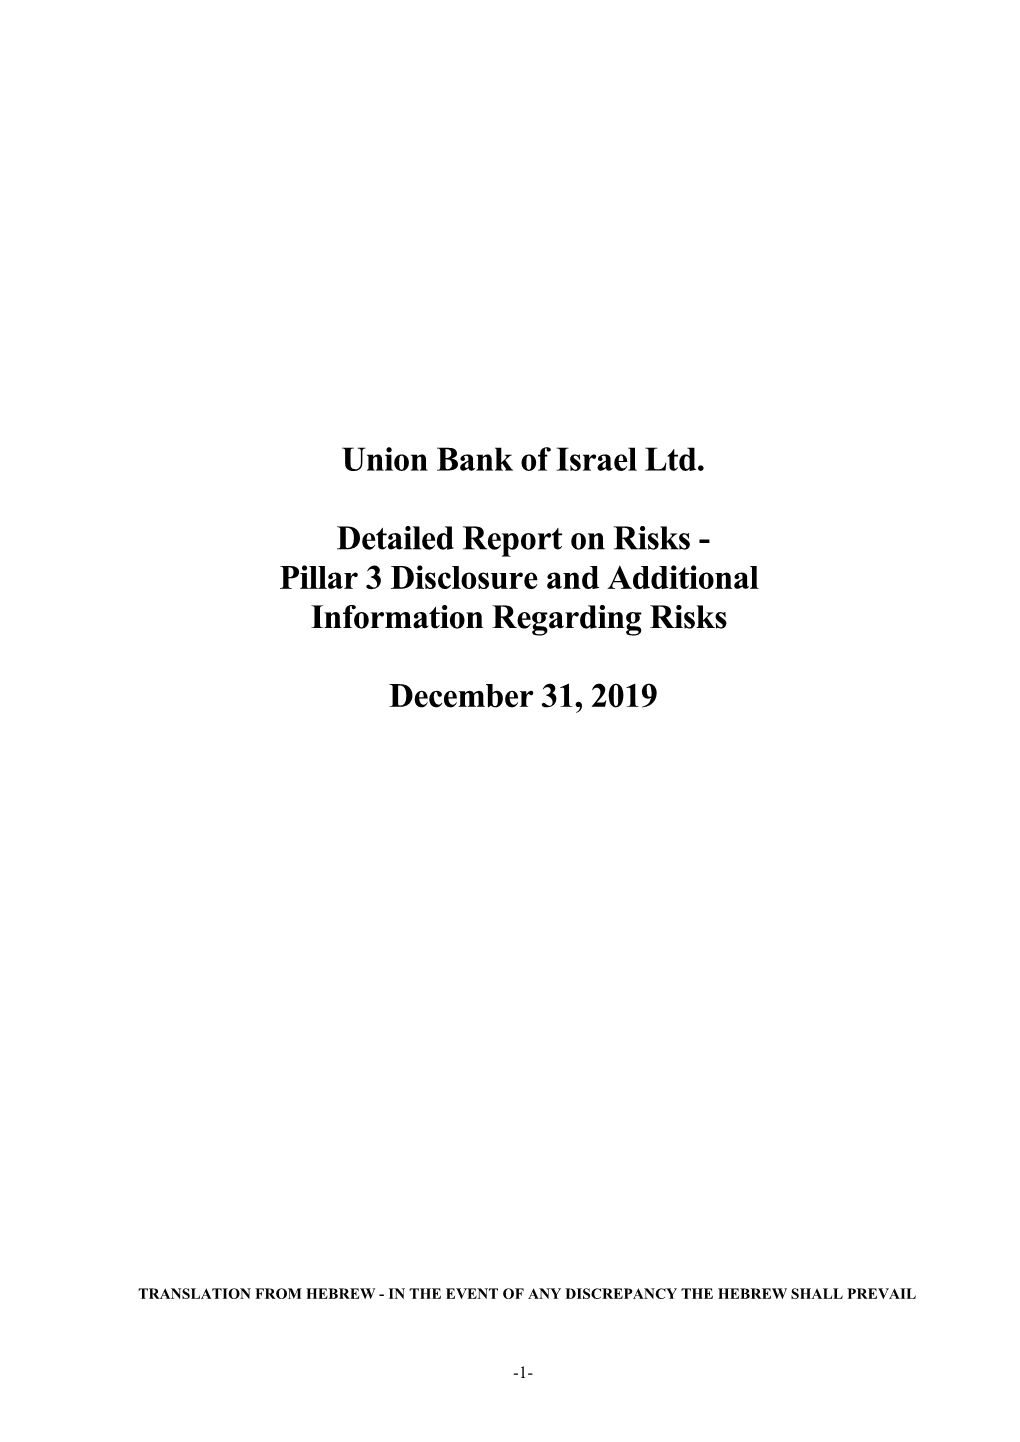 Union Bank of Israel Ltd. Detailed Report on Risks